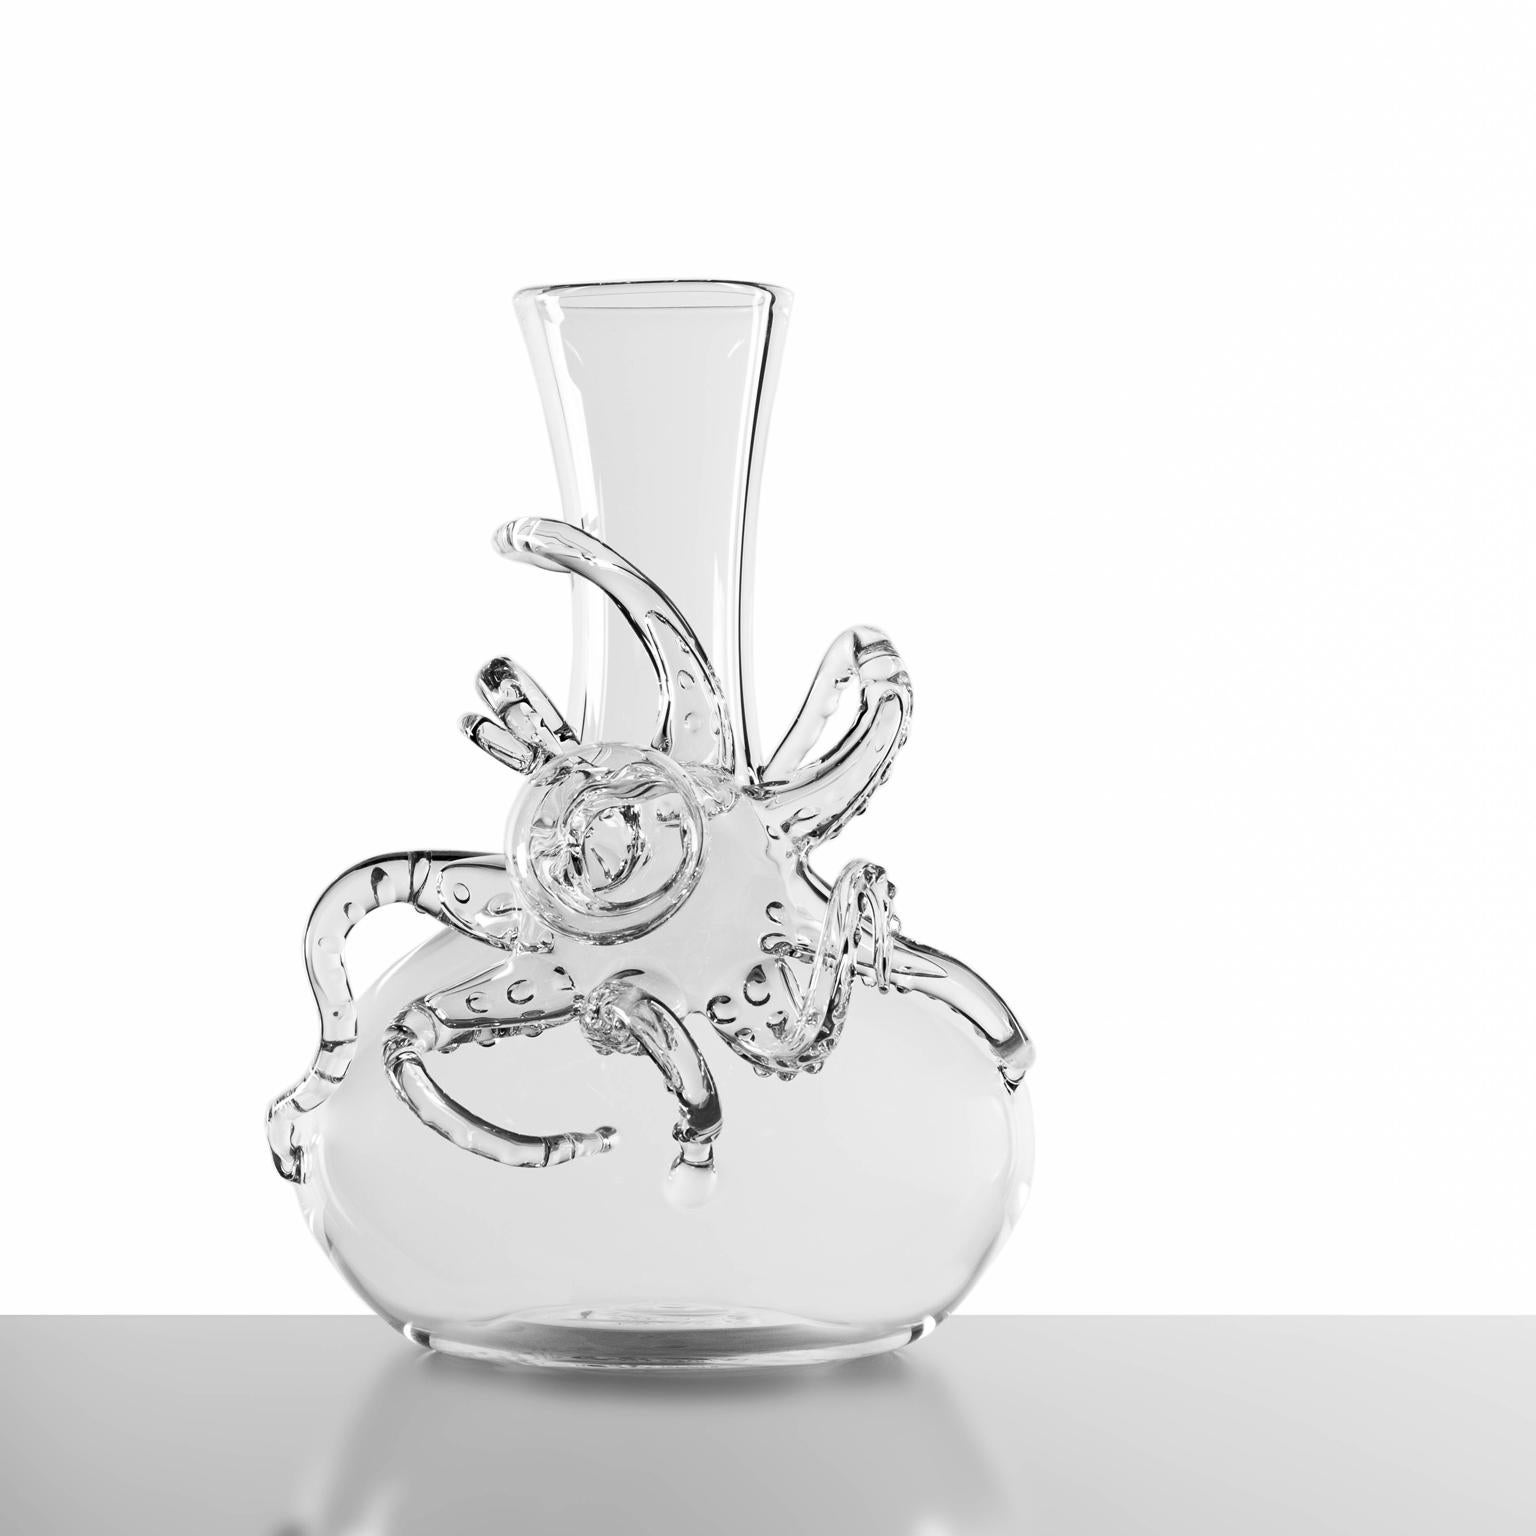 Modern Contemporary Tentacle Hand-Blown Glass Wine Decanter  For Sale